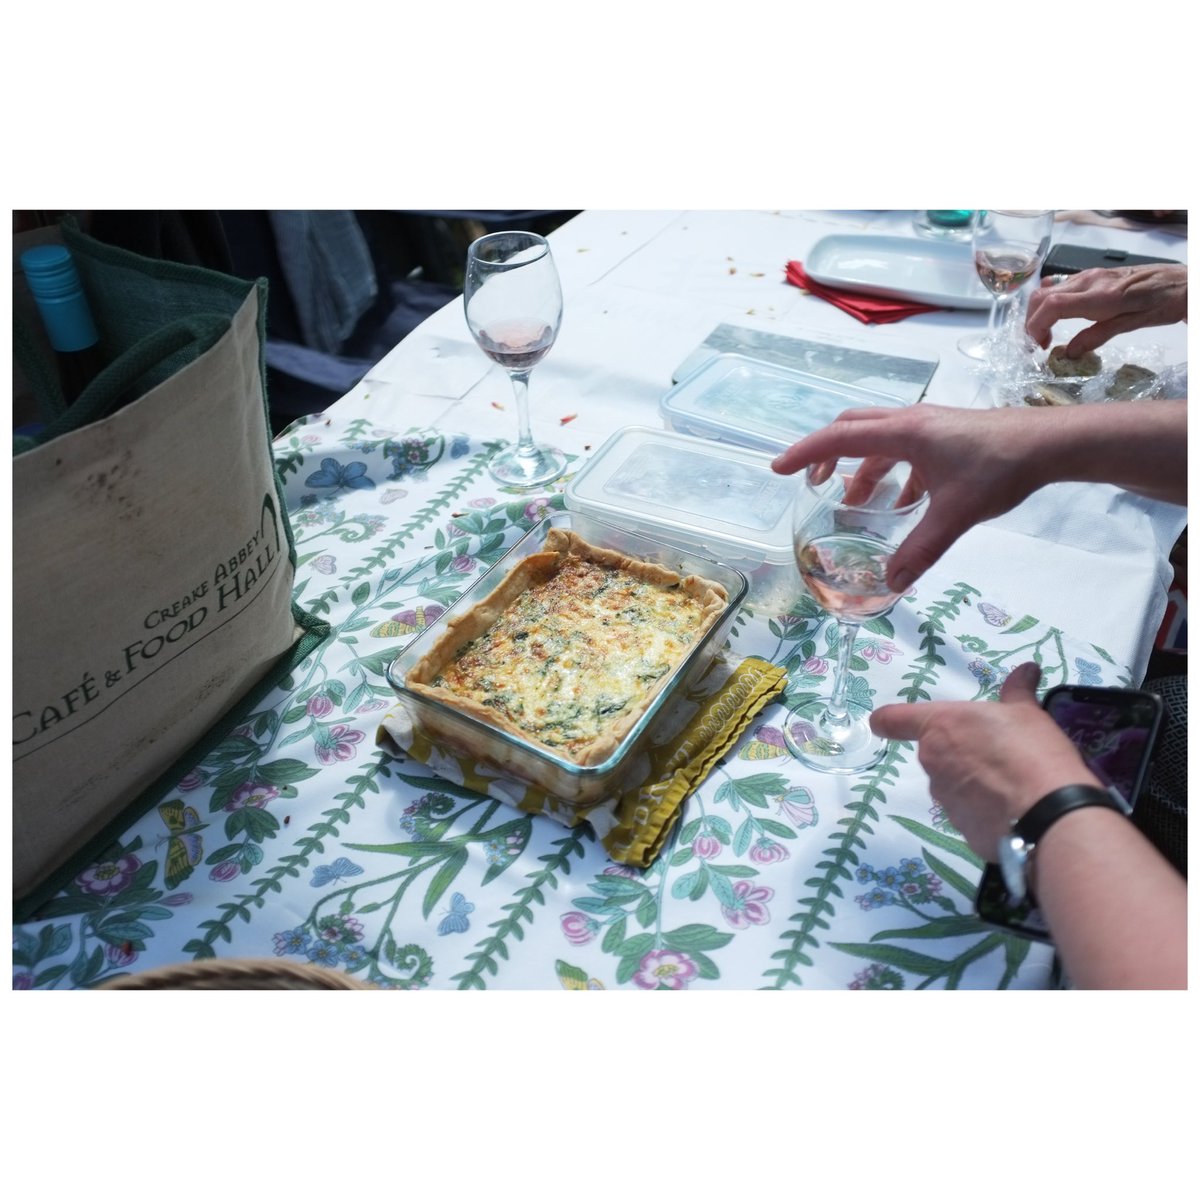 A coronation of quiches. #CoronationBigLunch #thisisengland #documentingbritain #streetparty #stamford